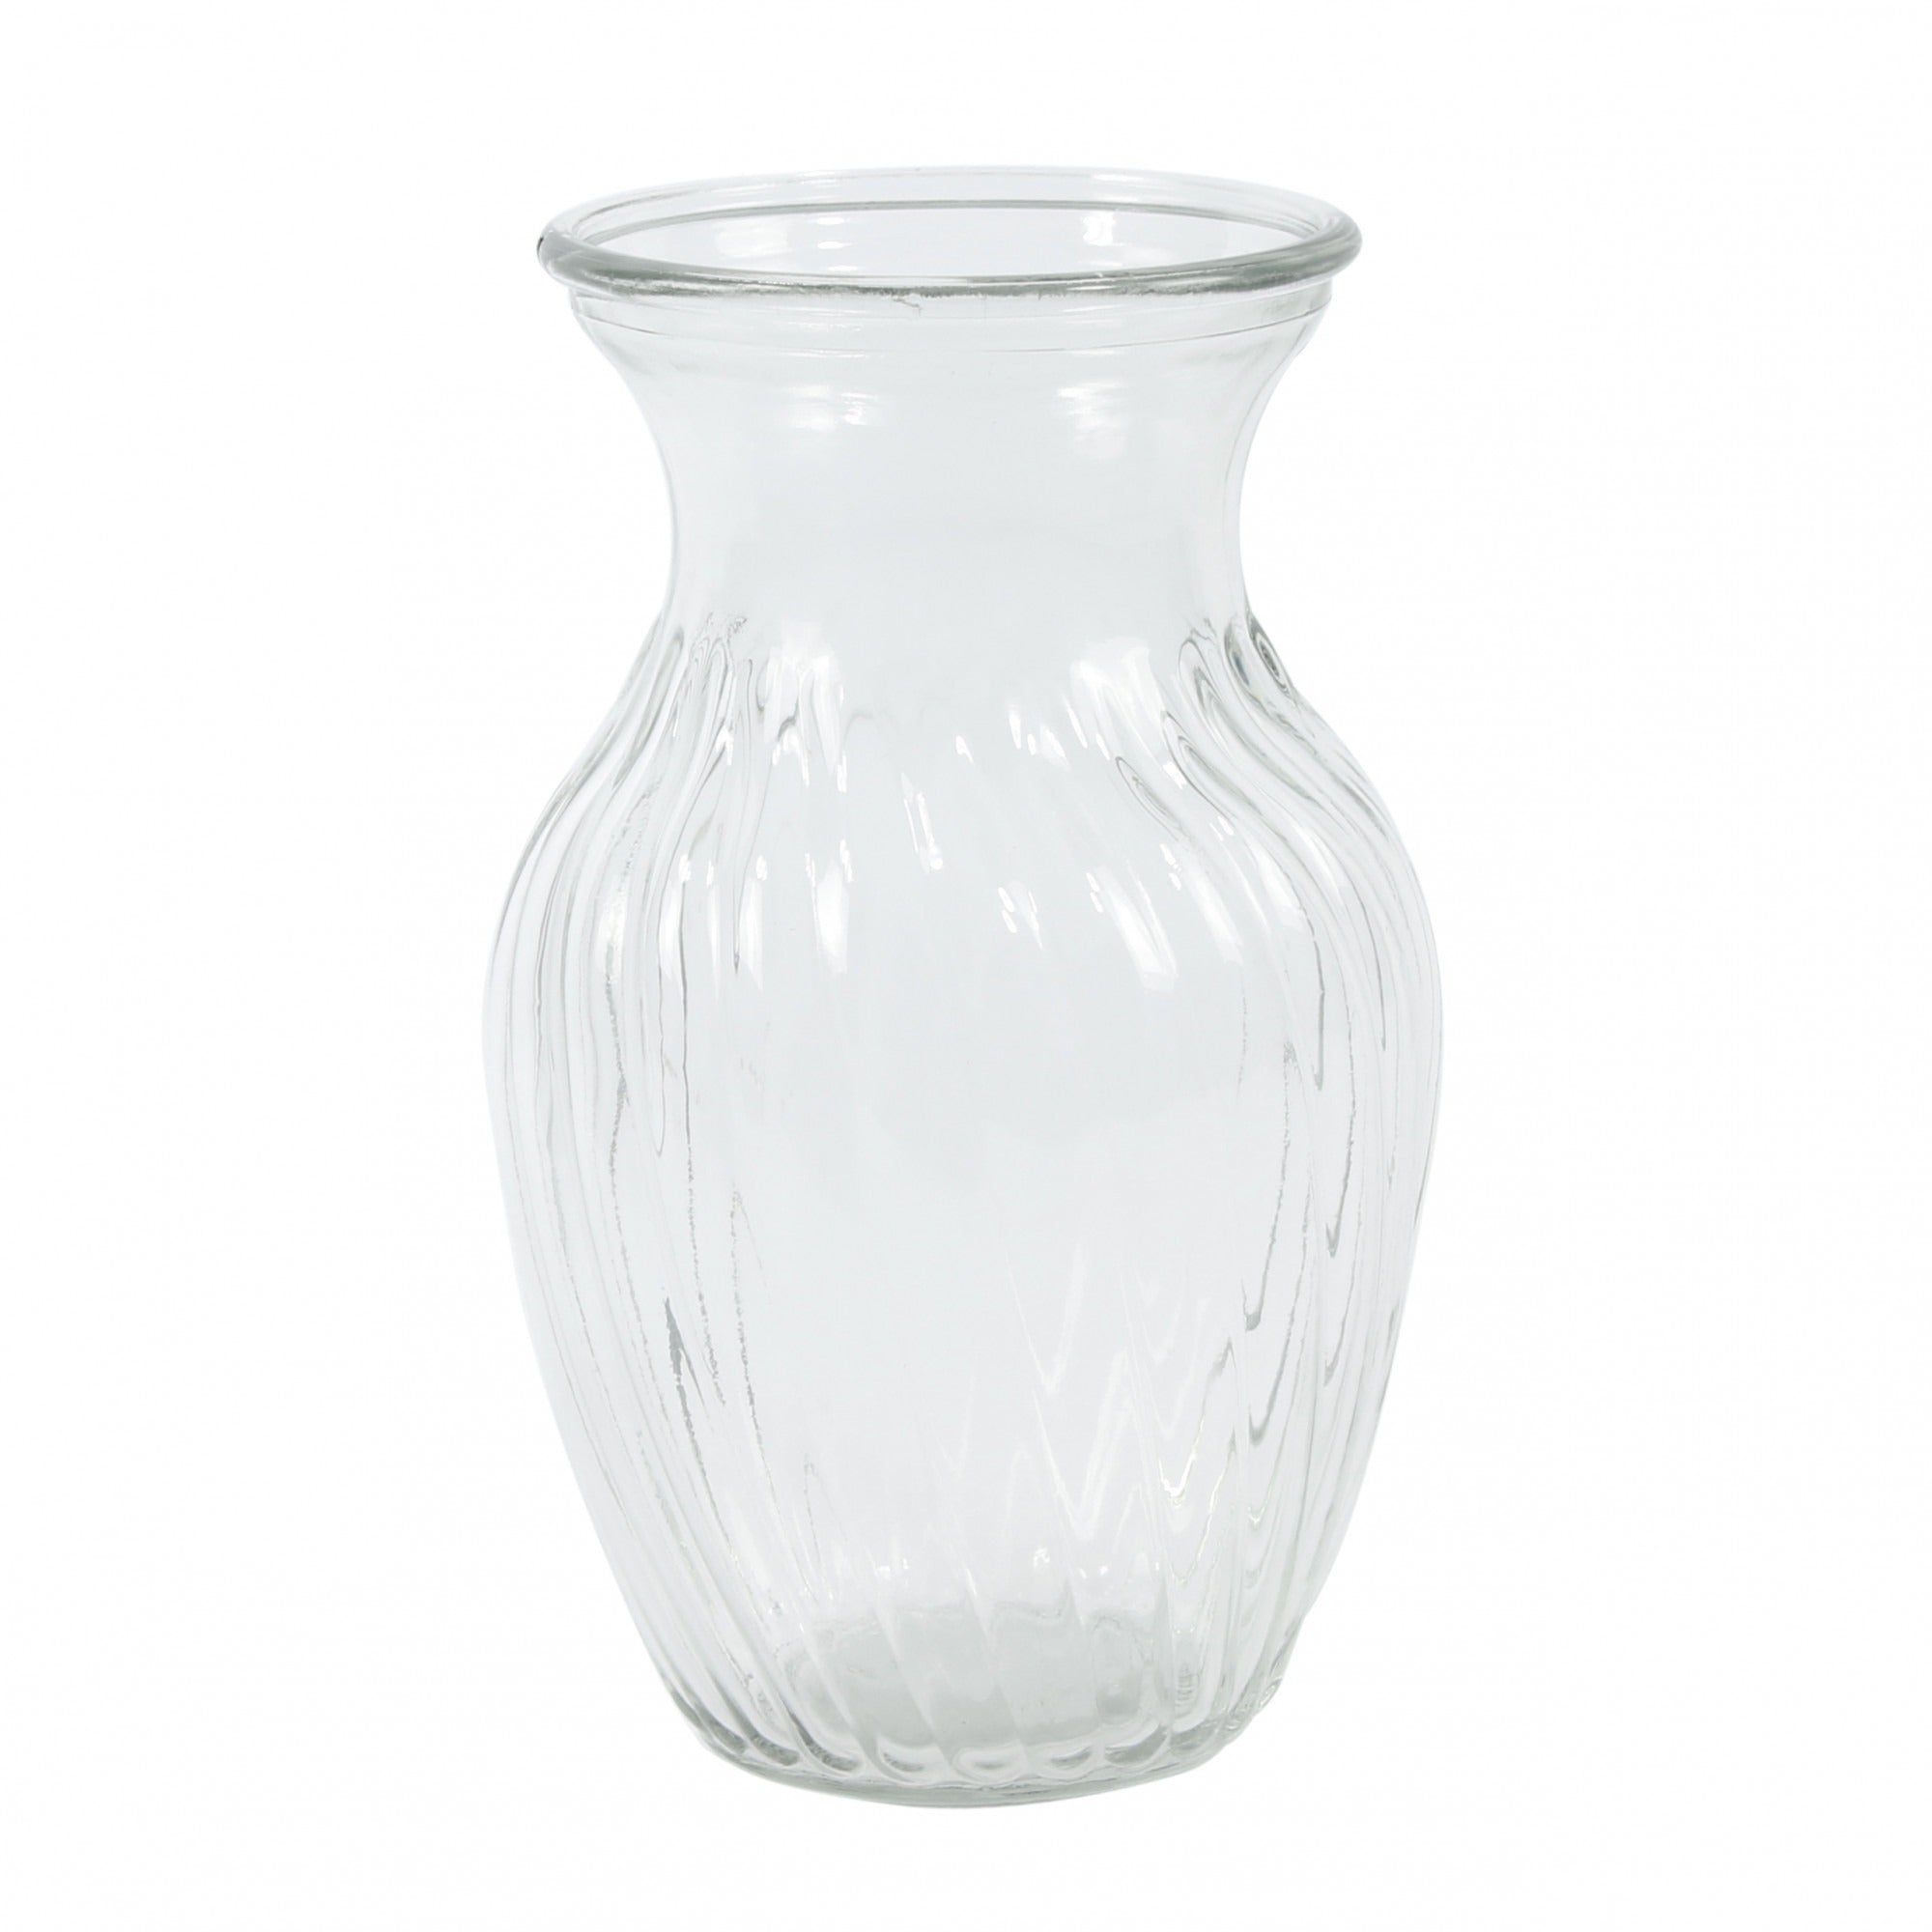 View Sweetheart Glass Vase 203cm information